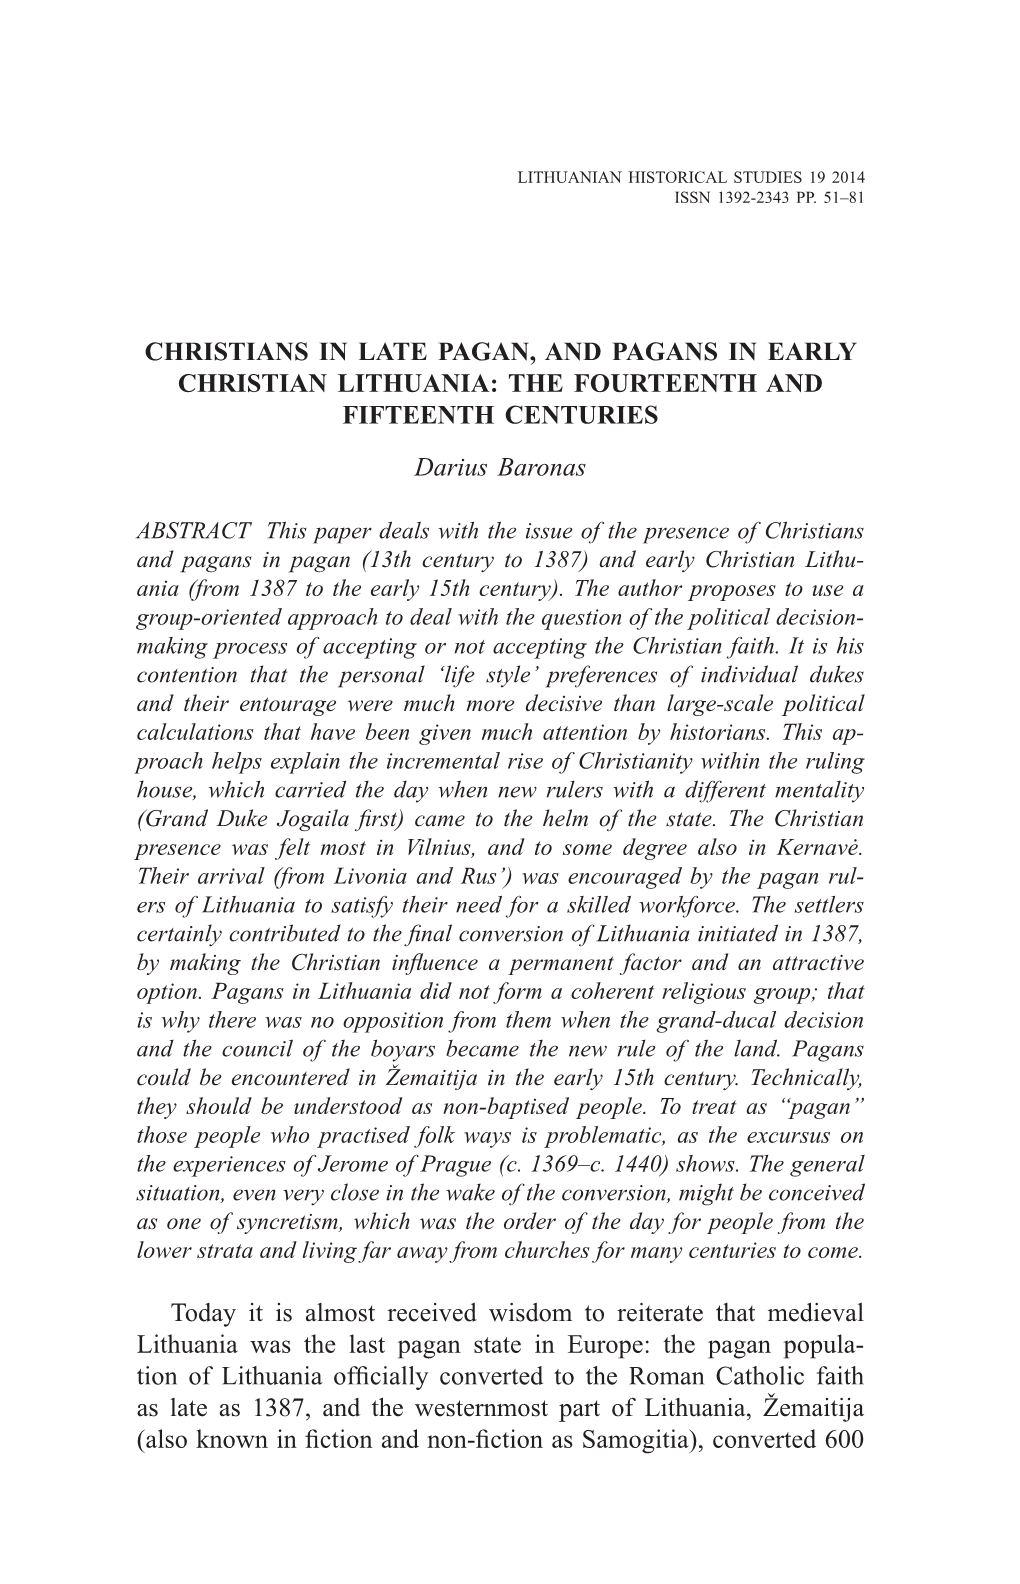 CHRISTIANS in LATE PAGAN, and PAGANS in EARLY Christian Lithuania: the Fourteenth and Fifteenth Centuries Darius Baronas Today I